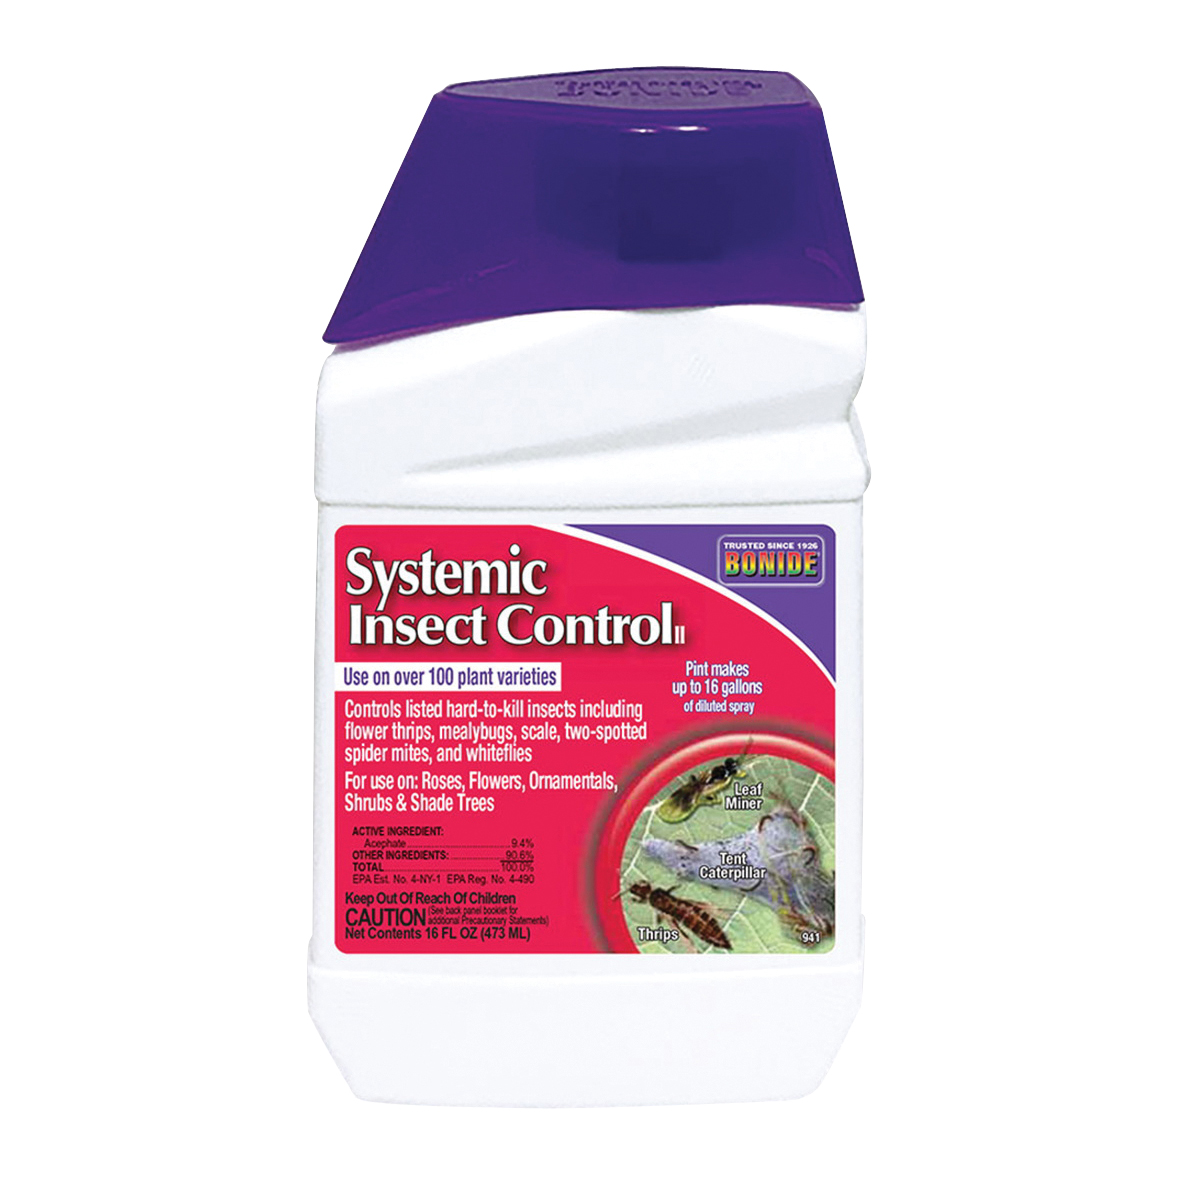 941 Systemic Insect Control, Liquid, Spray Application, 1 pt Bottle